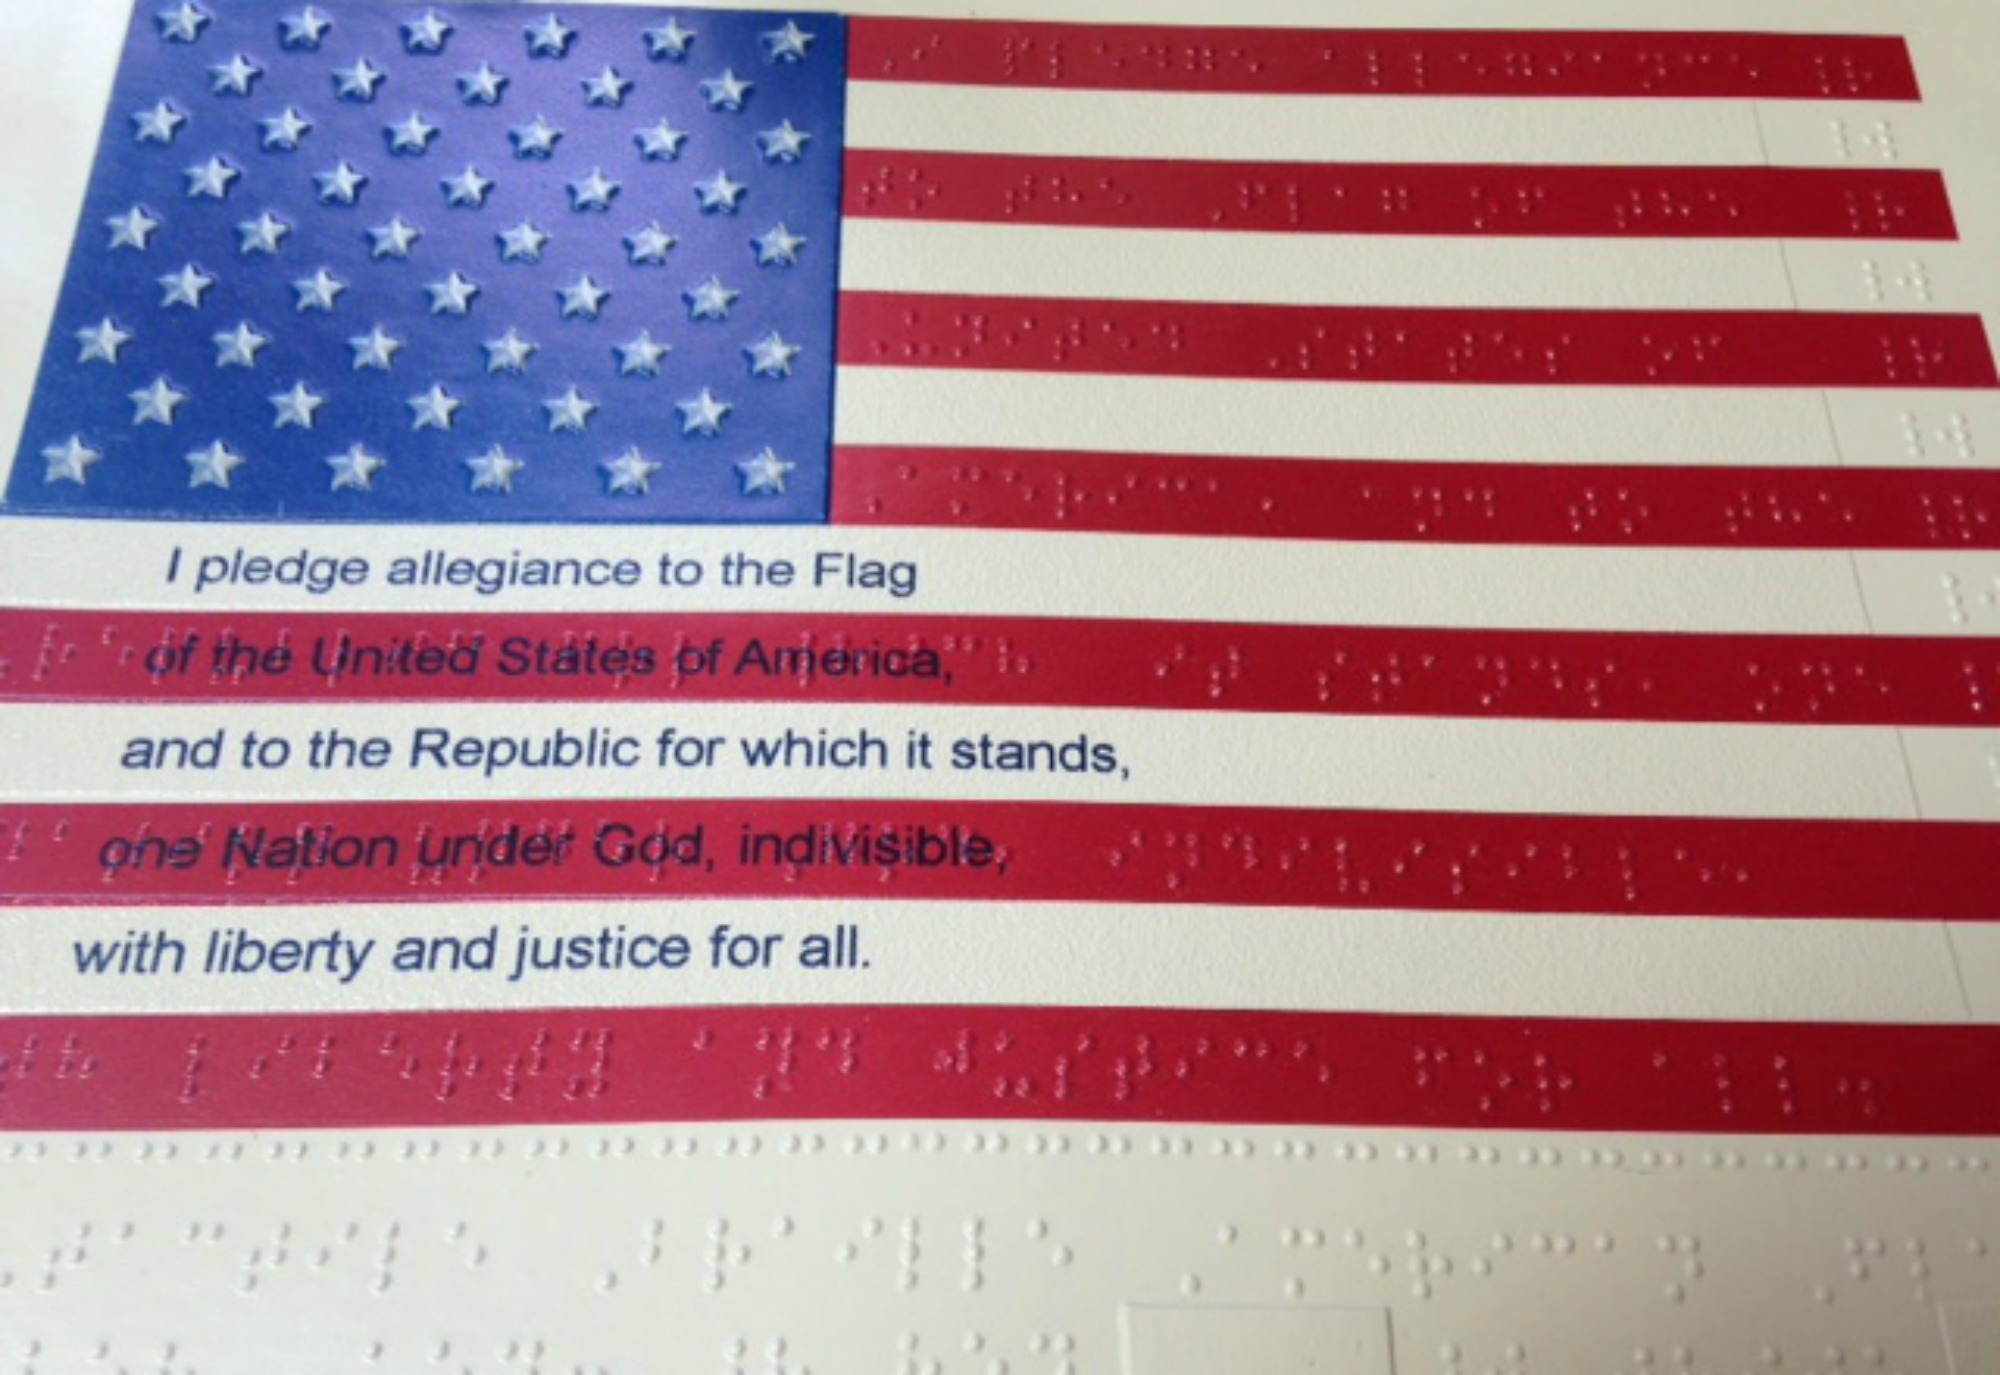 Tactile American flag with braille